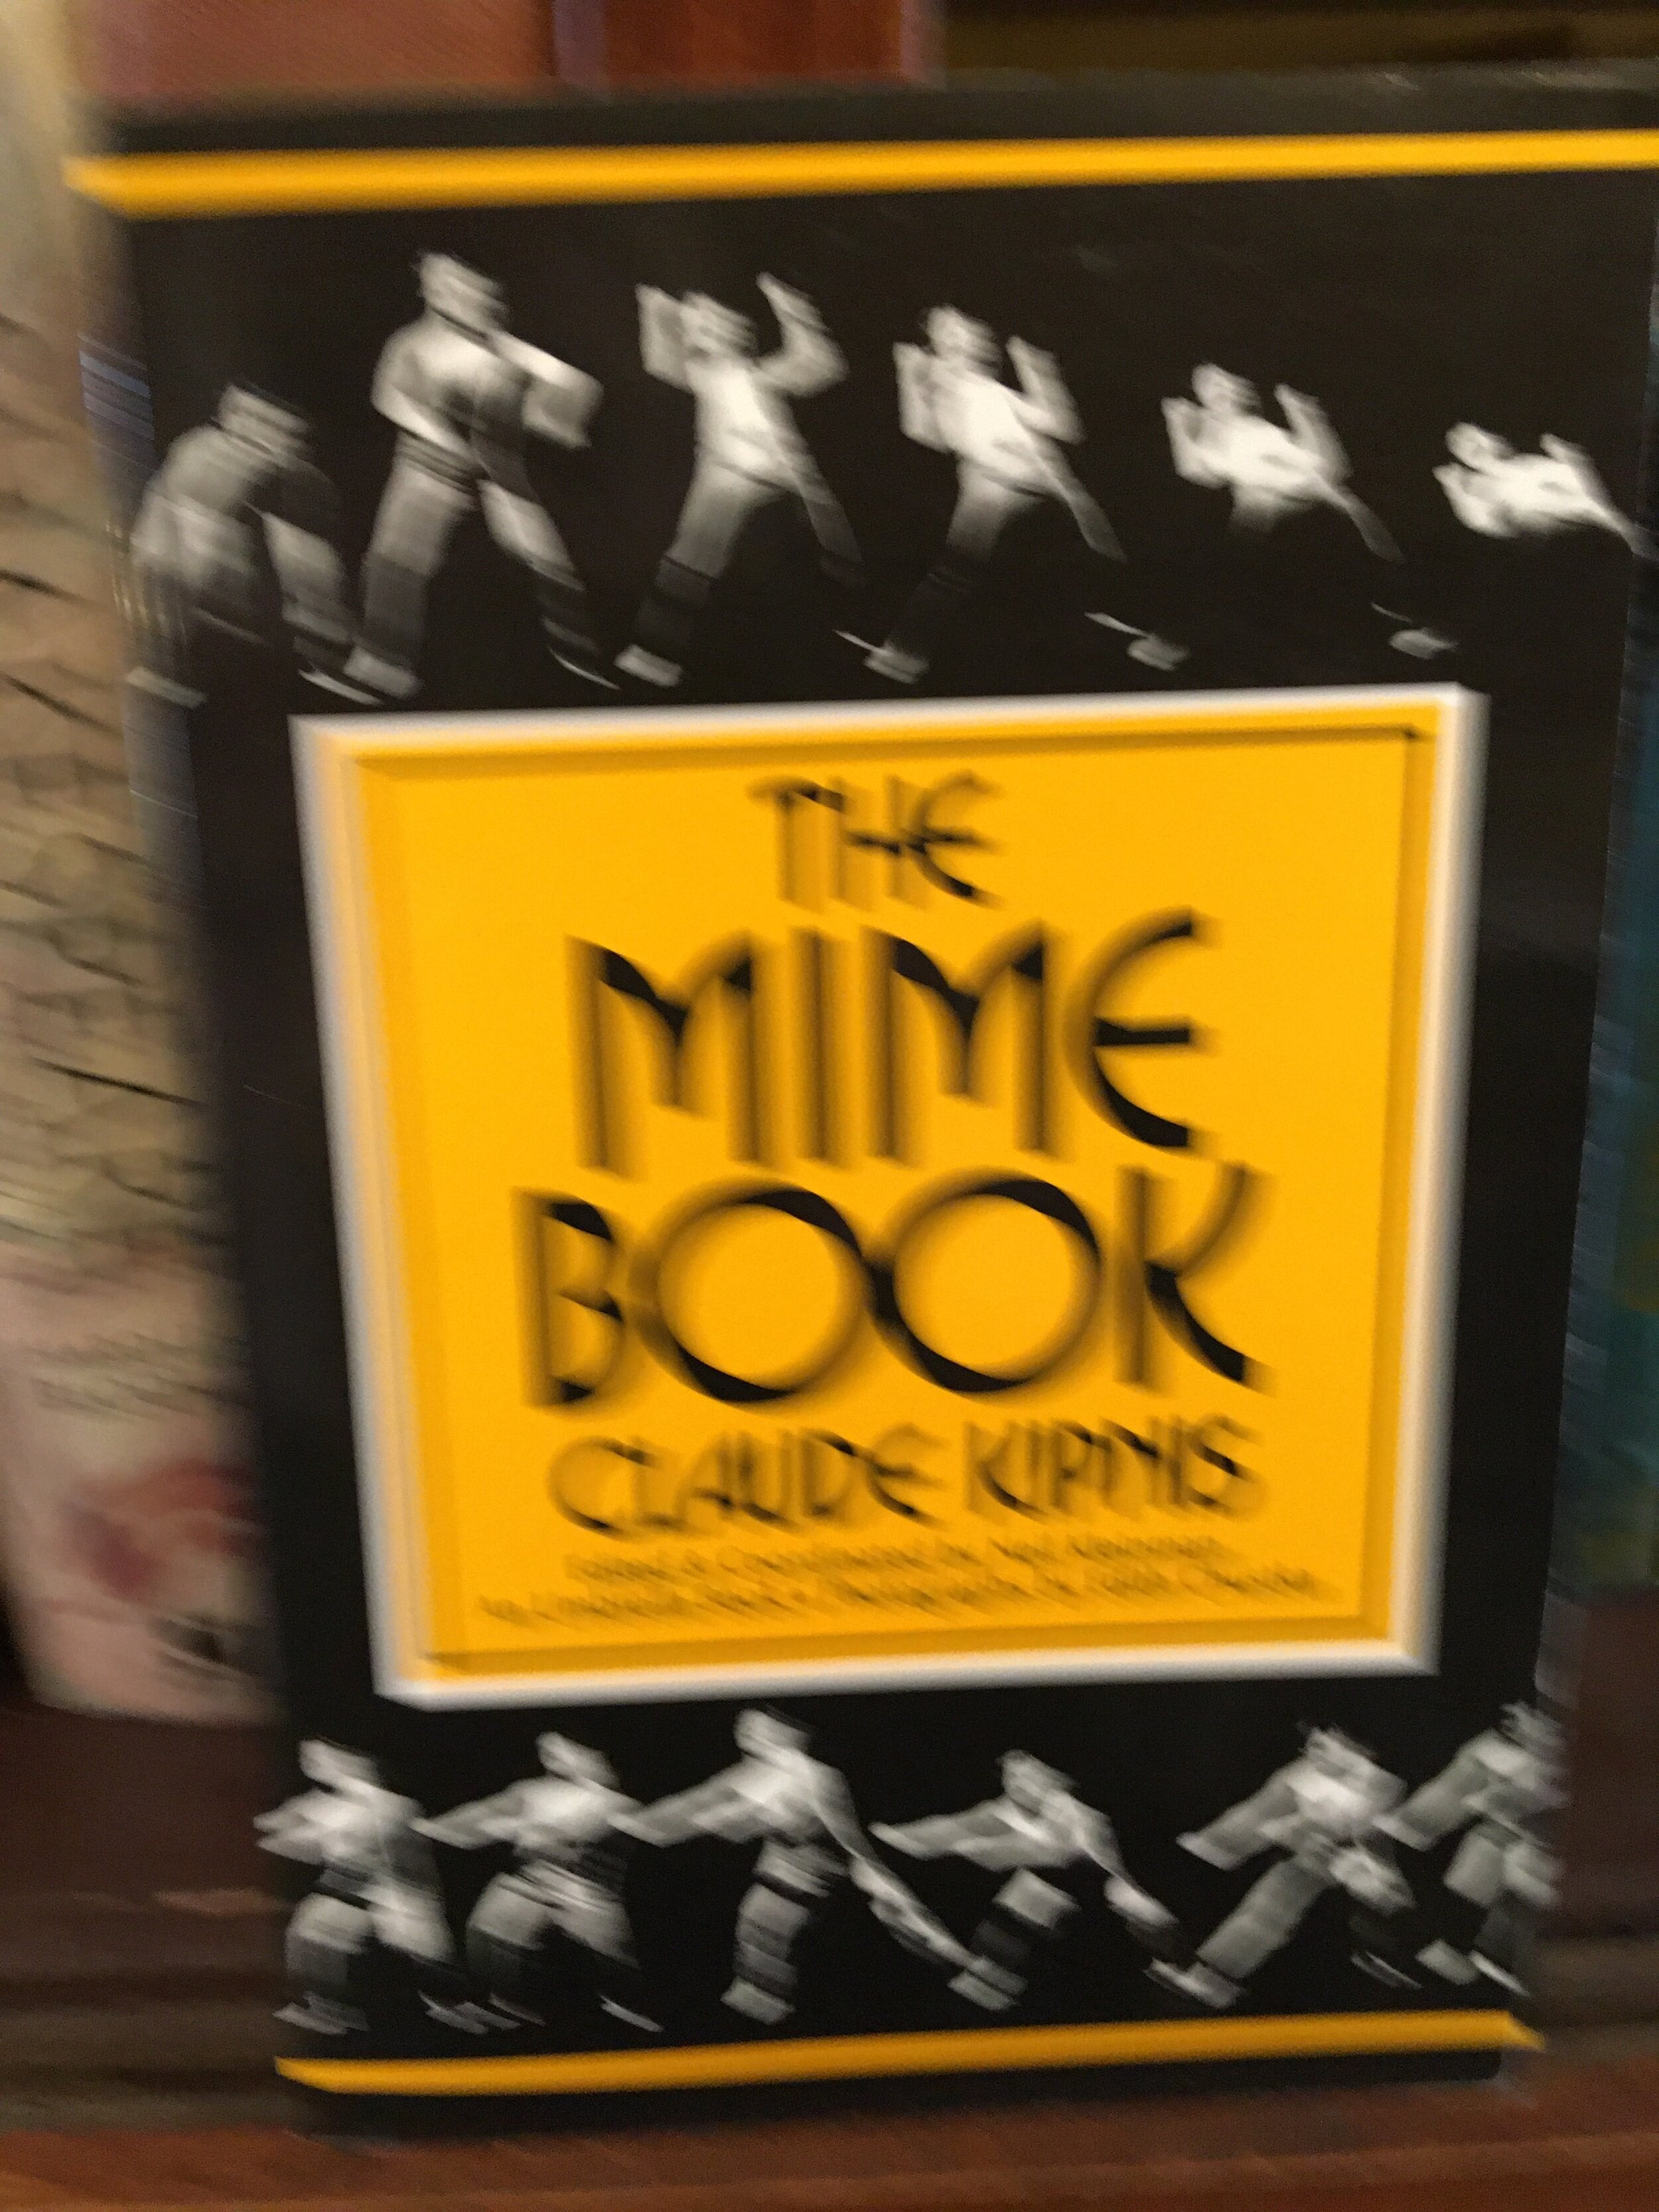 Legacy Used Books_The Mime Book.JPG